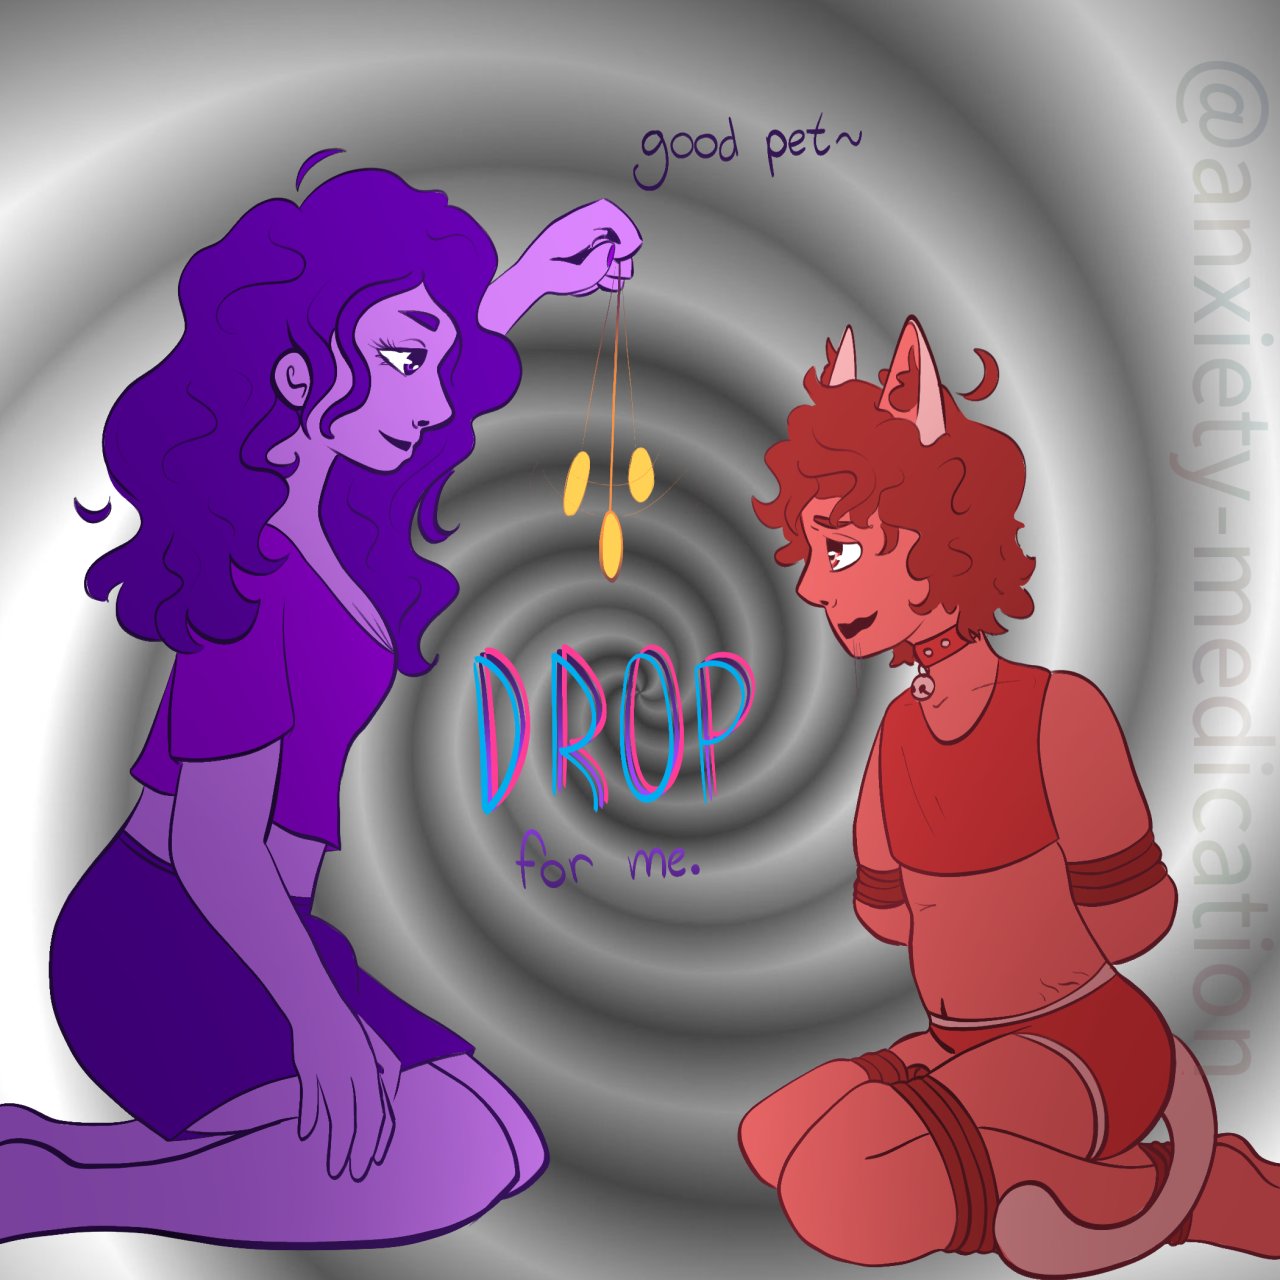 two people in front of a spiral. the woman on the left is purple coded, and the man on the right is red coded. the man is tied up, and the woman is kneeling showing him a pendulum.